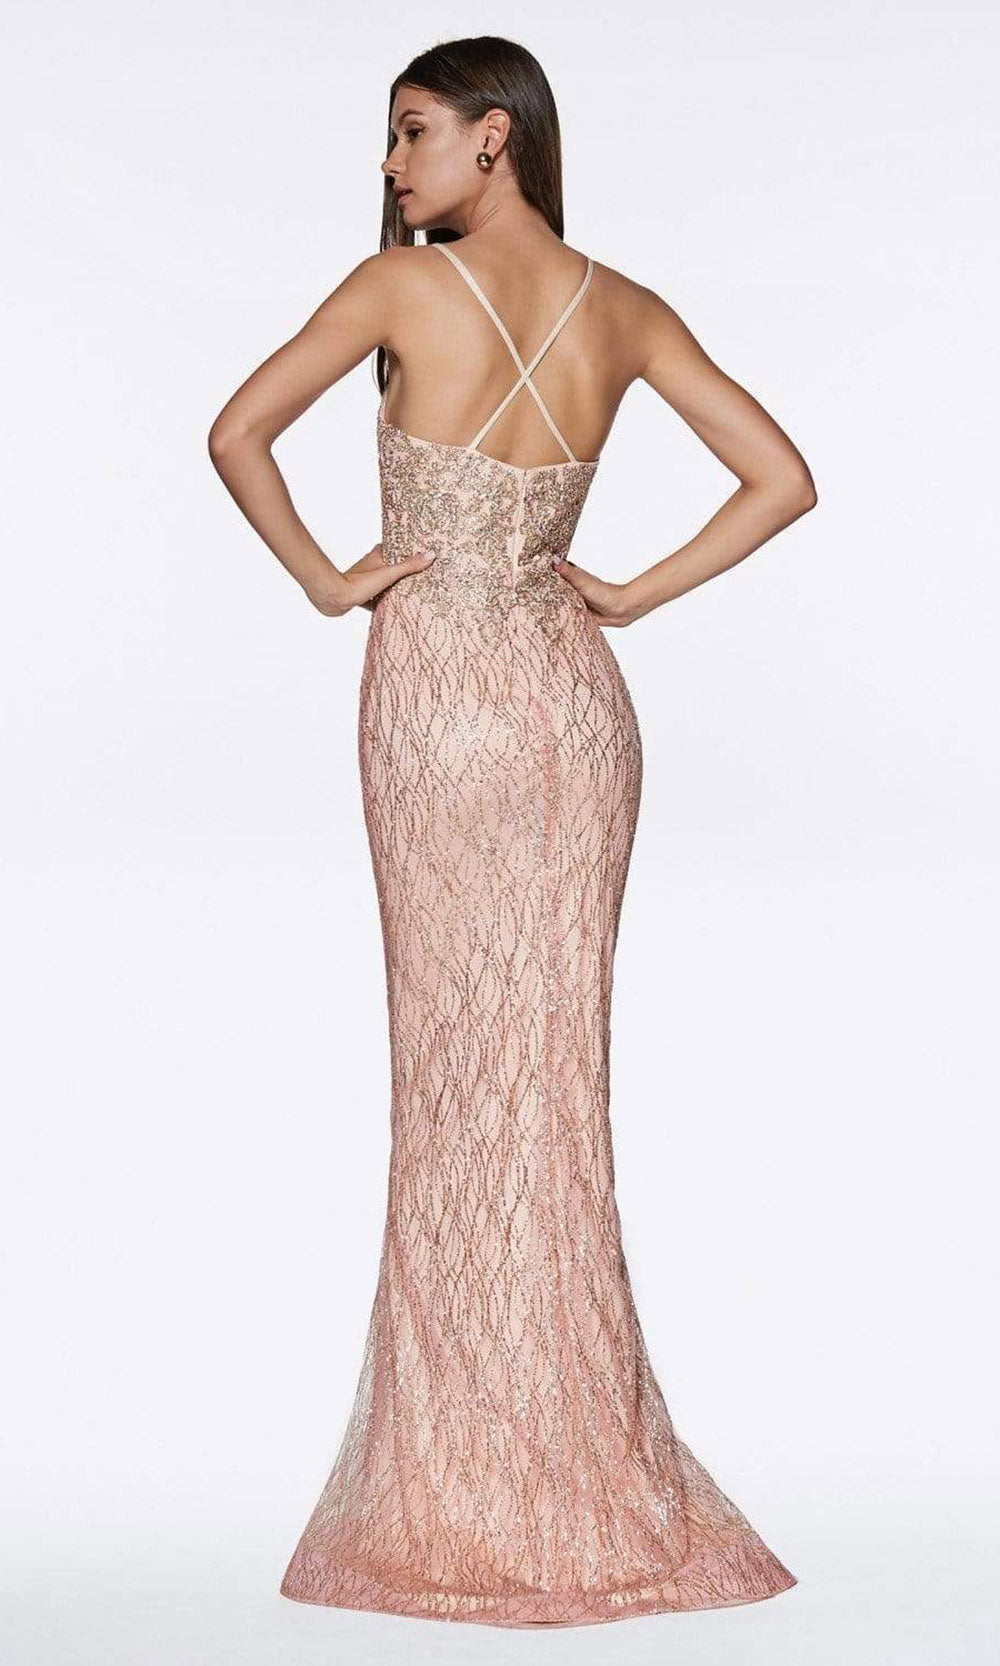 Cinderella Divine - Sleeveless V-Neck Glitter Lace Mermaid Gown ML934 - 2 pcs Rose Gold in sizes M and L Available CCSALE L / Rose Gold